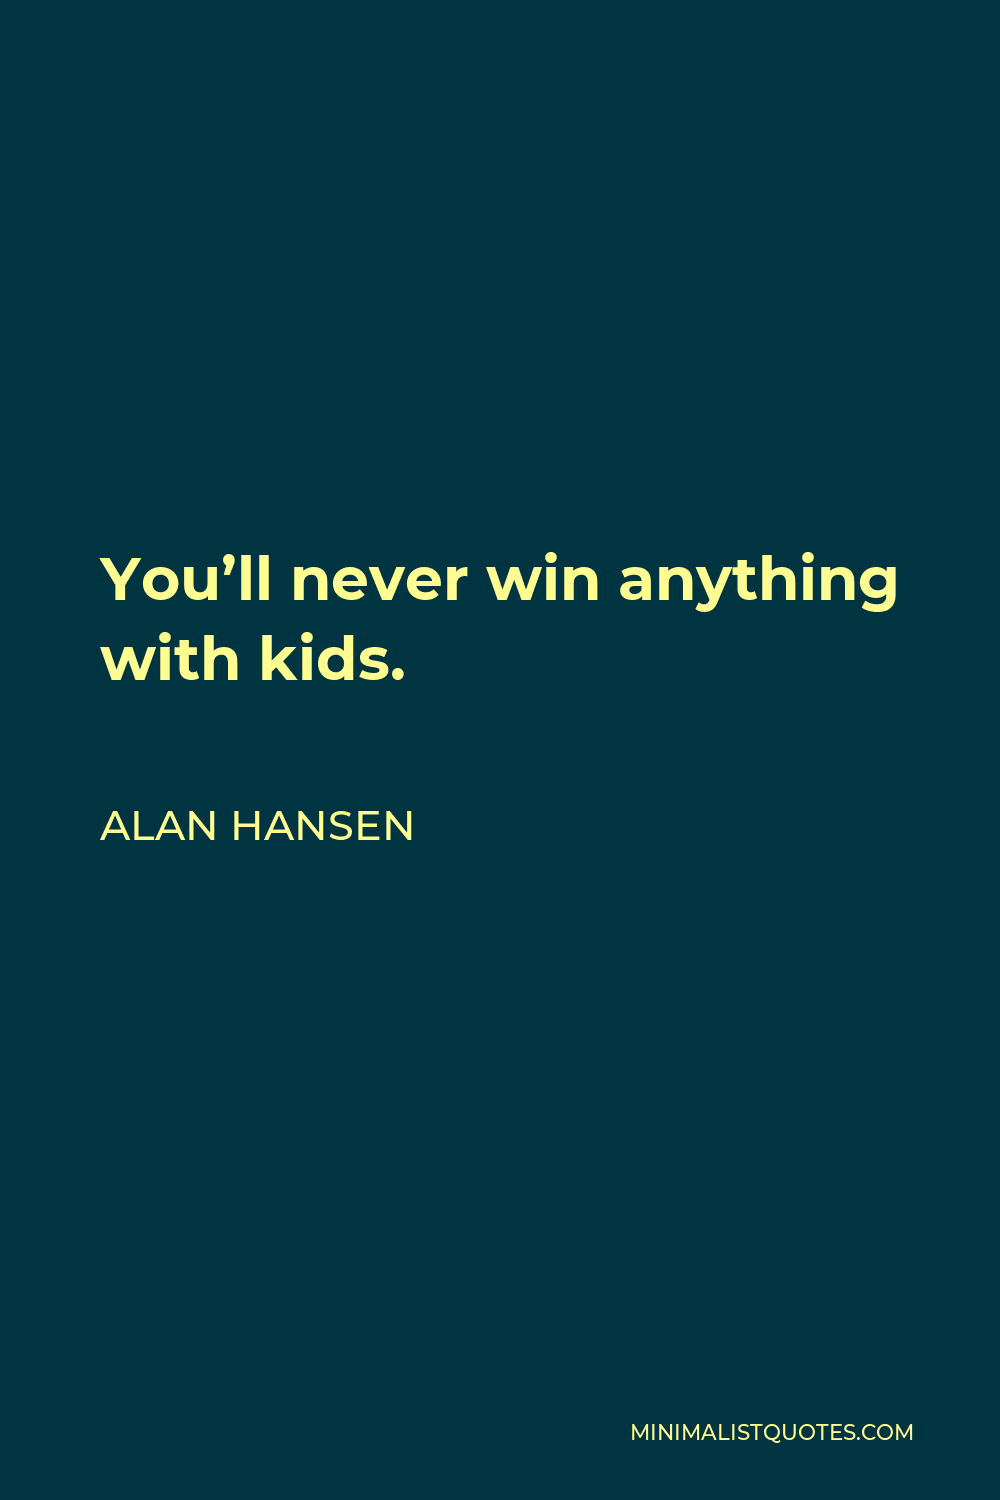 Alan Hansen Quote - You’ll never win anything with kids.